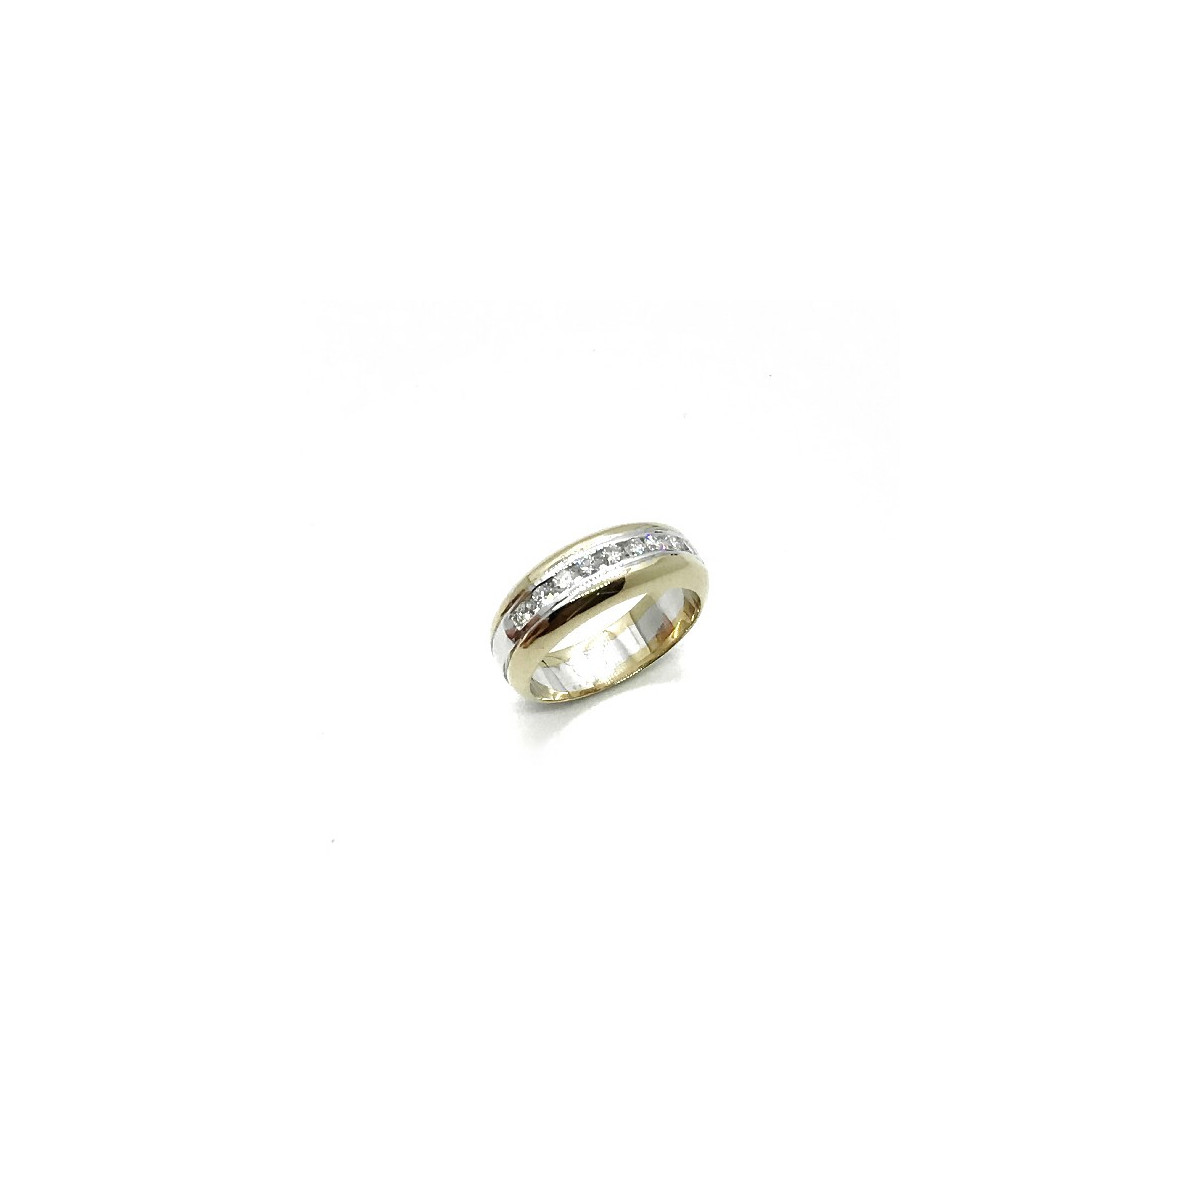 HALF ALLIANCE CLIMENT 1890 RING - S-2046/BR